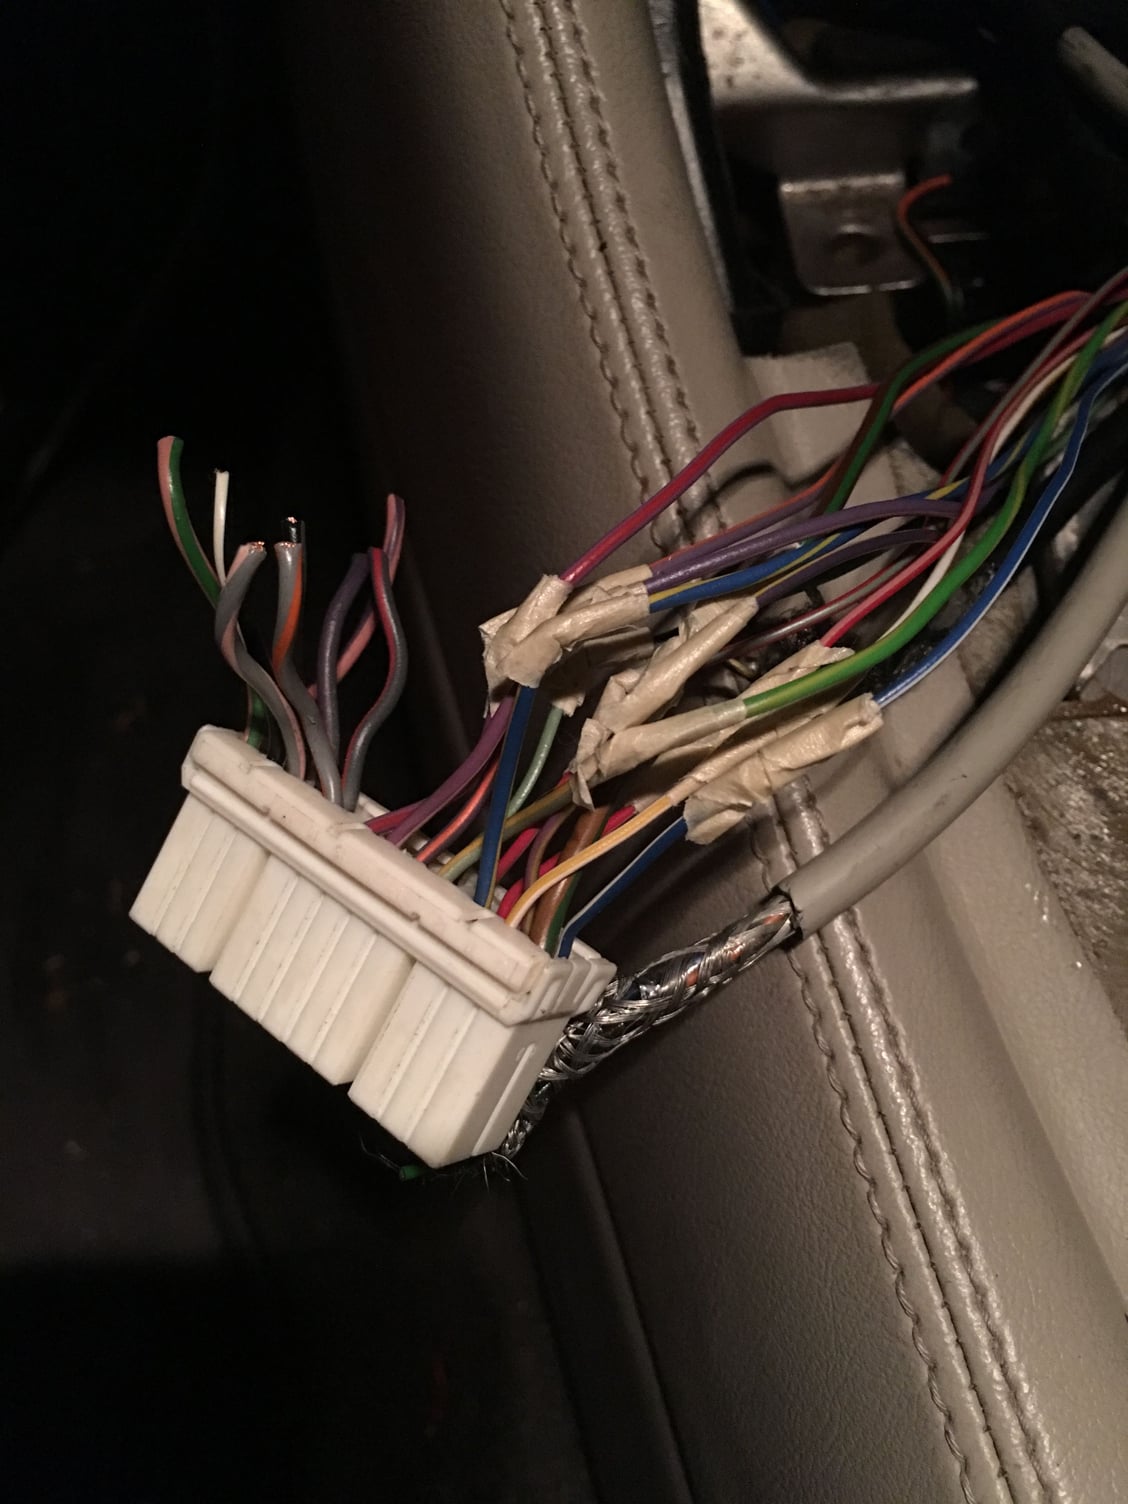 Help with factory stereo wiring harness pinout - Jaguar Forums - Jaguar